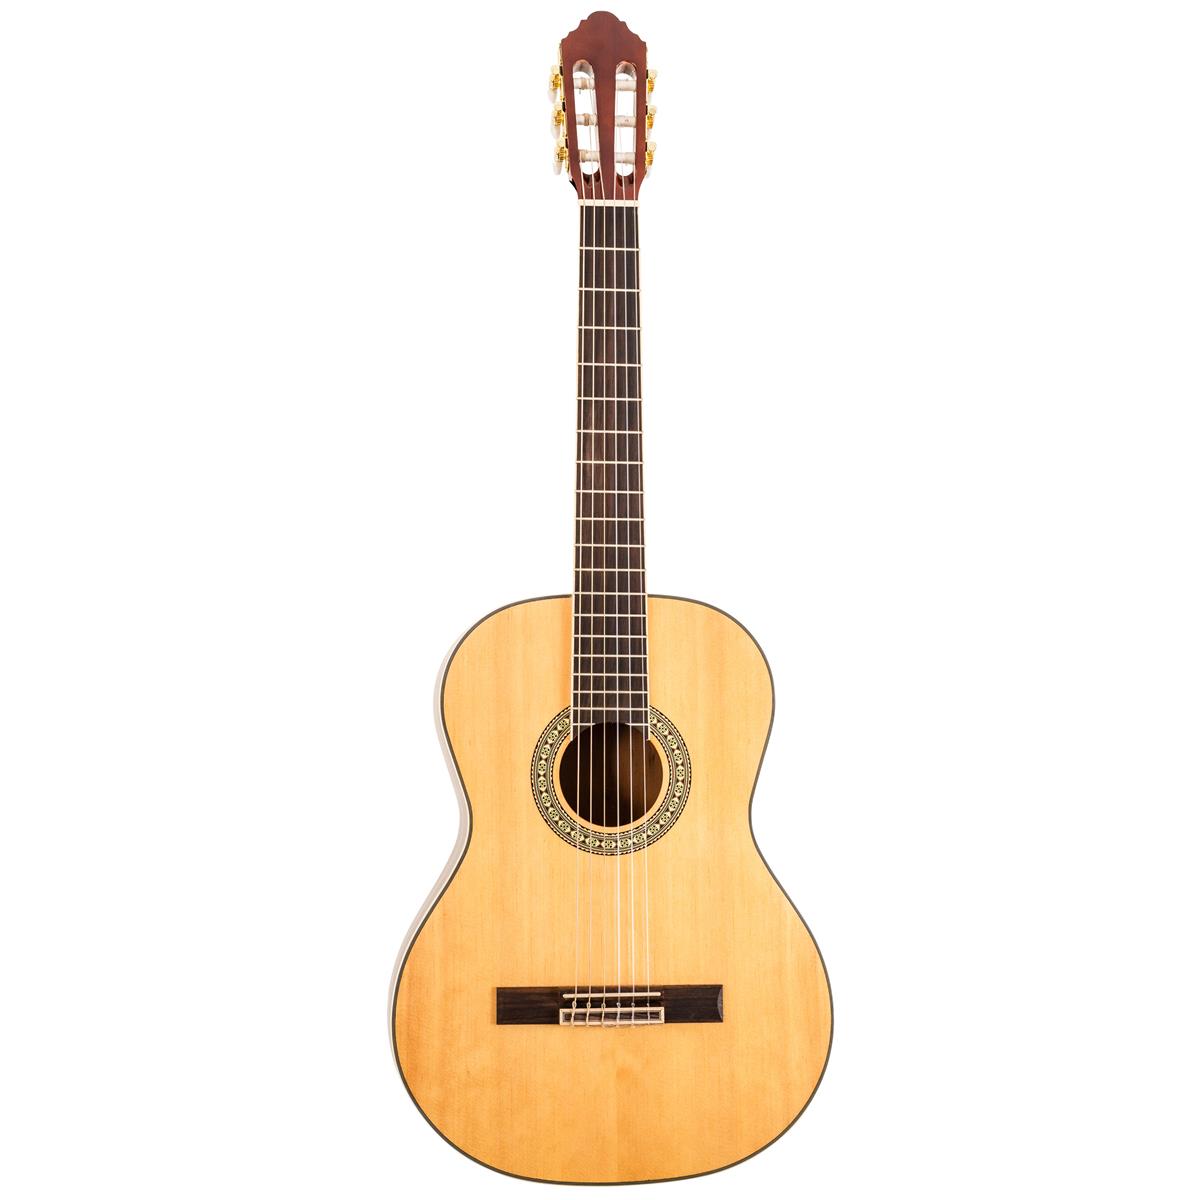 Peavey Delta Woods CNS-2 Classical Nylon String Acoustic Guitar -  03620320